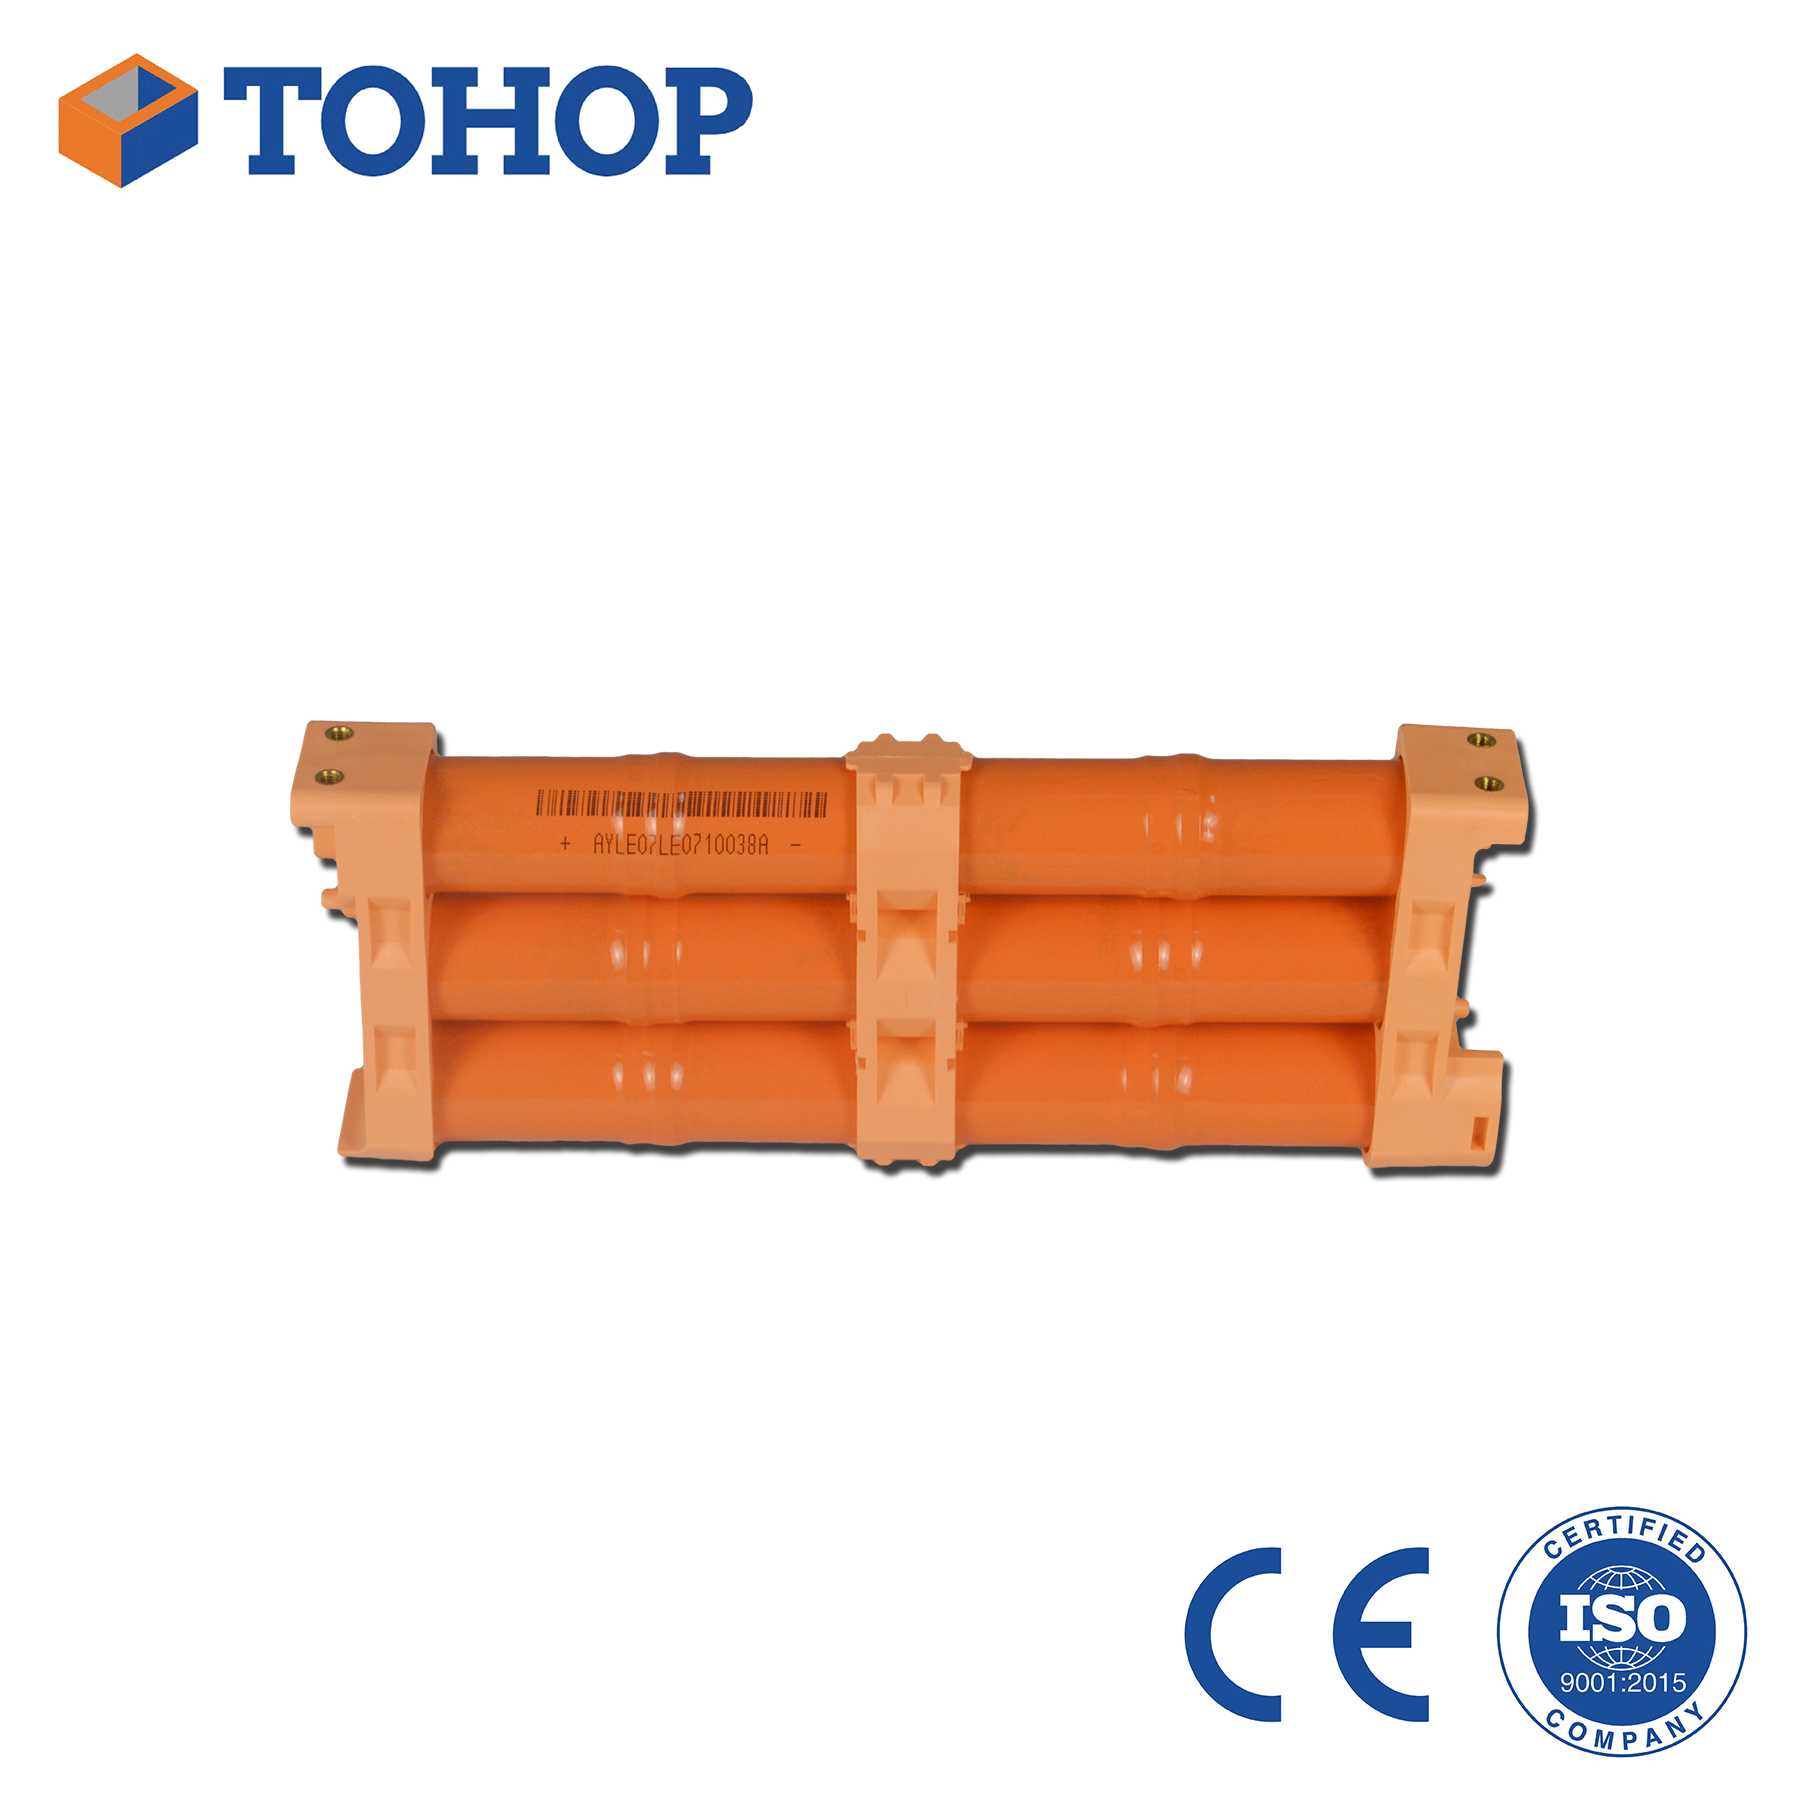 TOHOP CT200h Hybrid Battery Cell for Lexus Replacement NiMH Cylindrical Battery